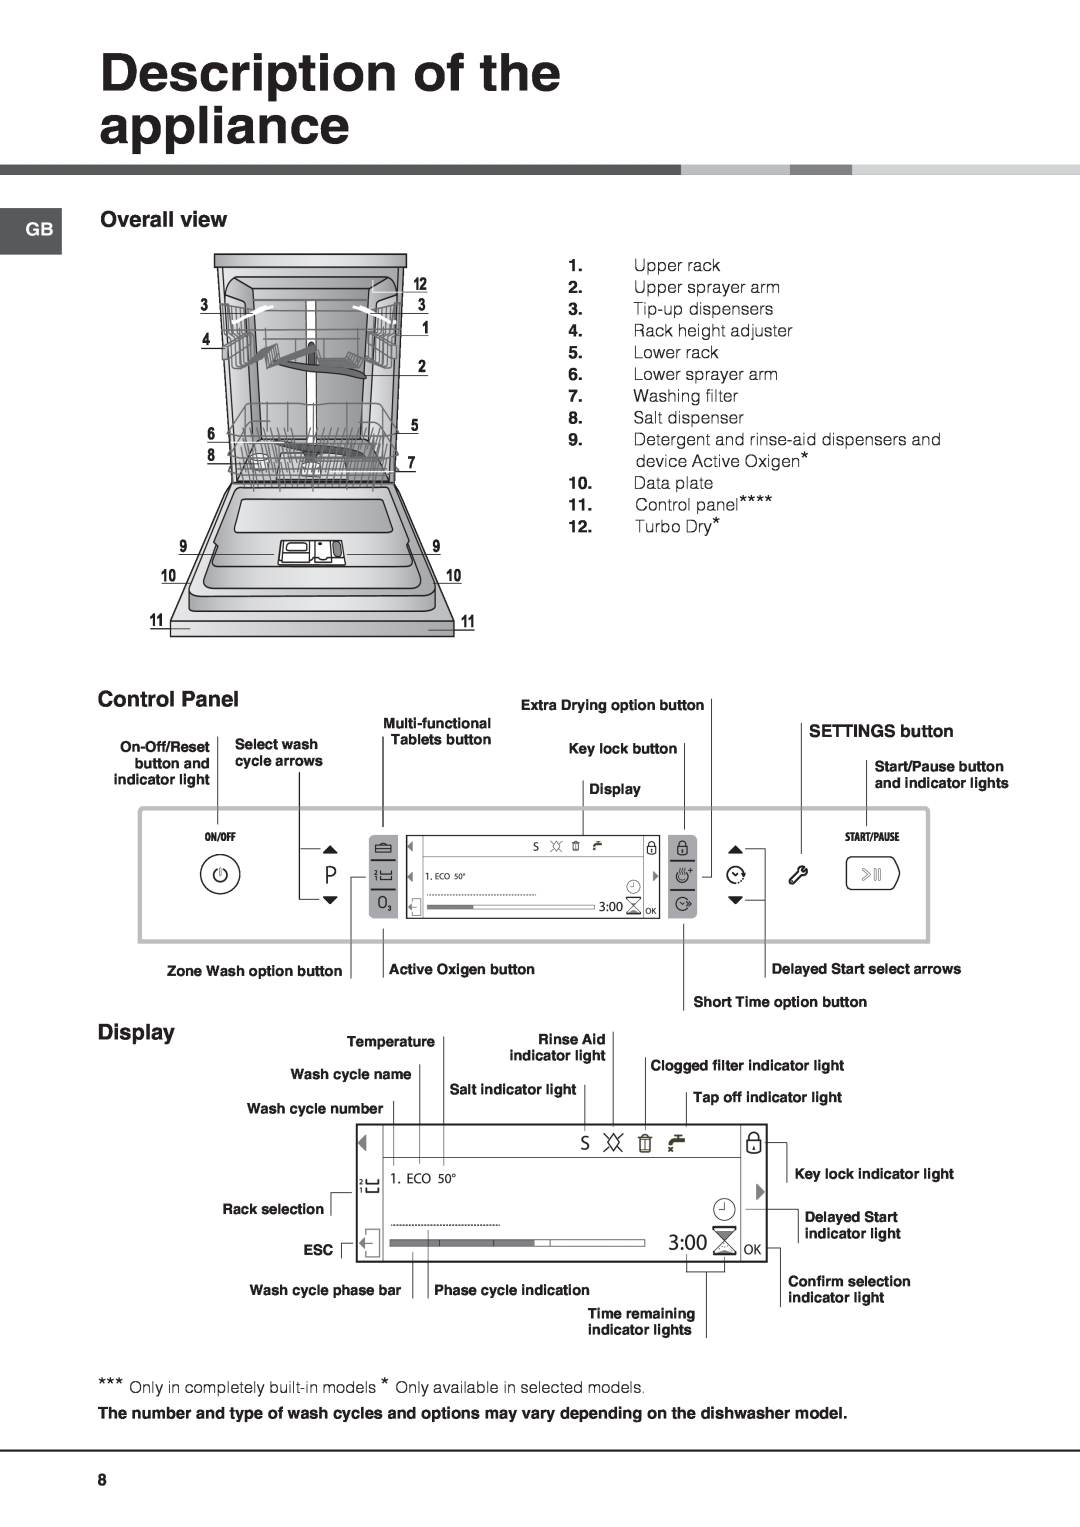 Hotpoint FDUD 43133 Ultima manual Description of the appliance, Overall view, Control Panel, Display, SETTINGS button 